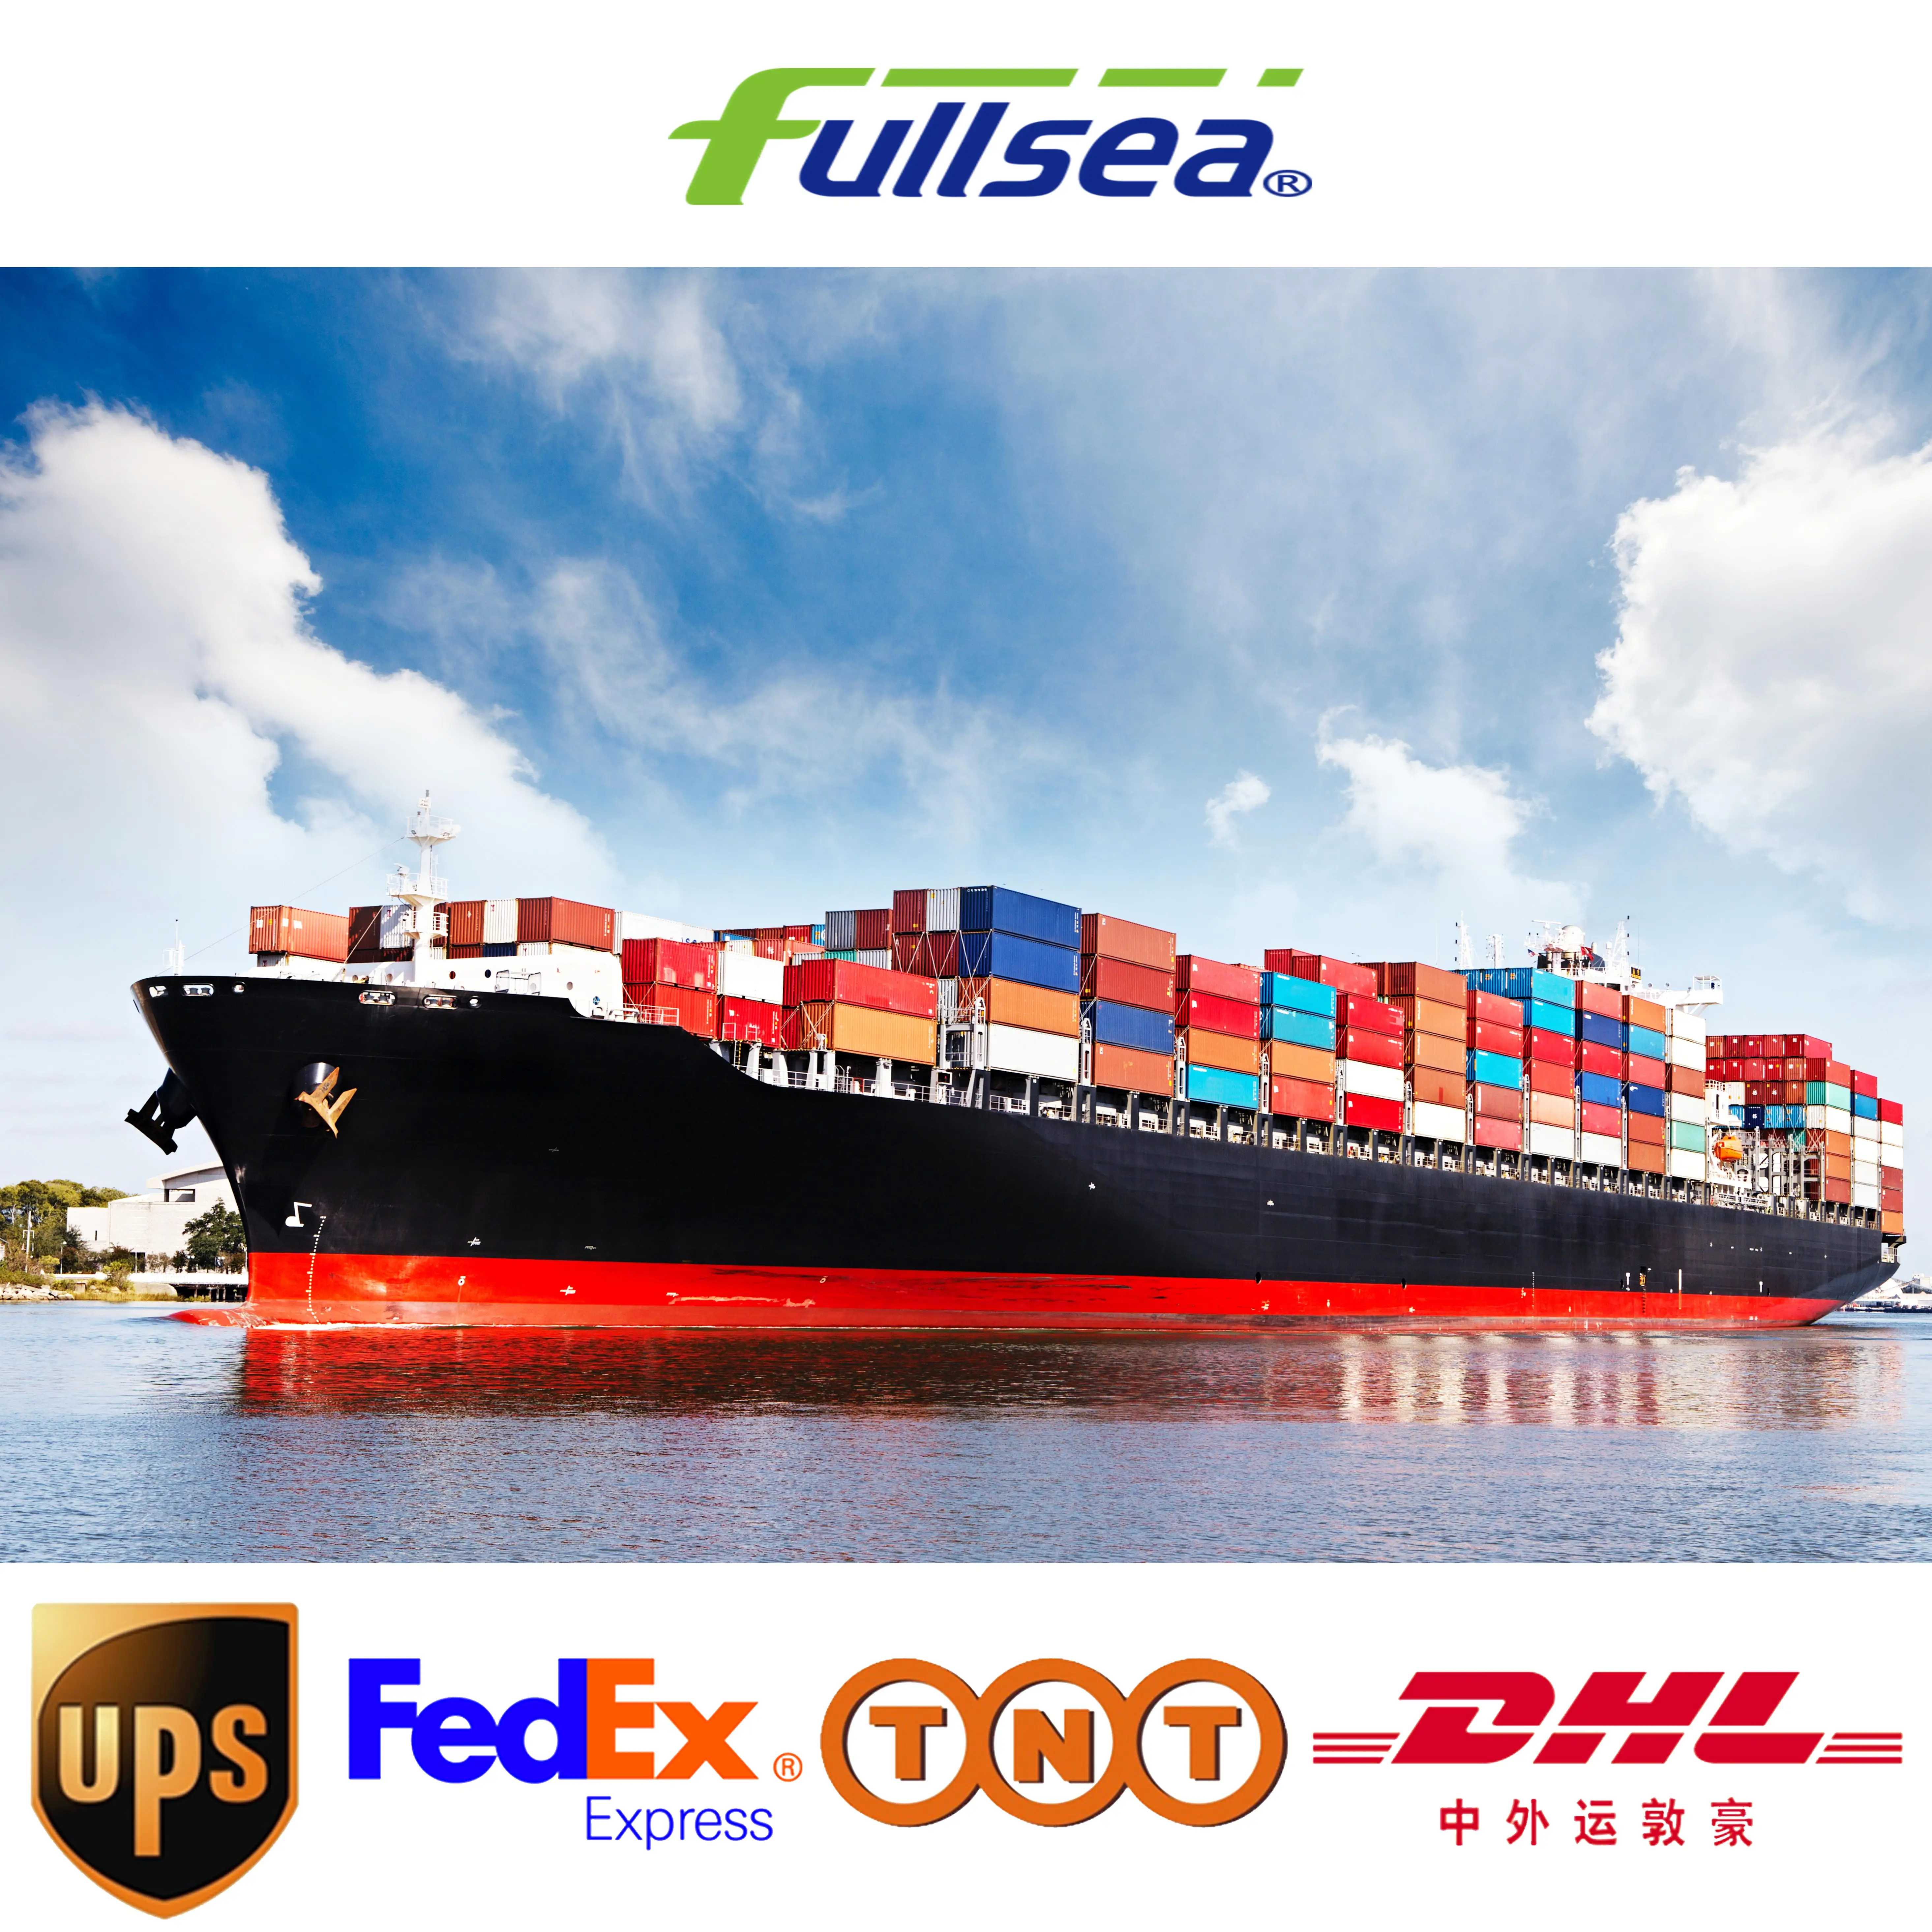 FBA Fba freight forwarder DDU DDP service fast delivery to the United States, Canada and Mexico